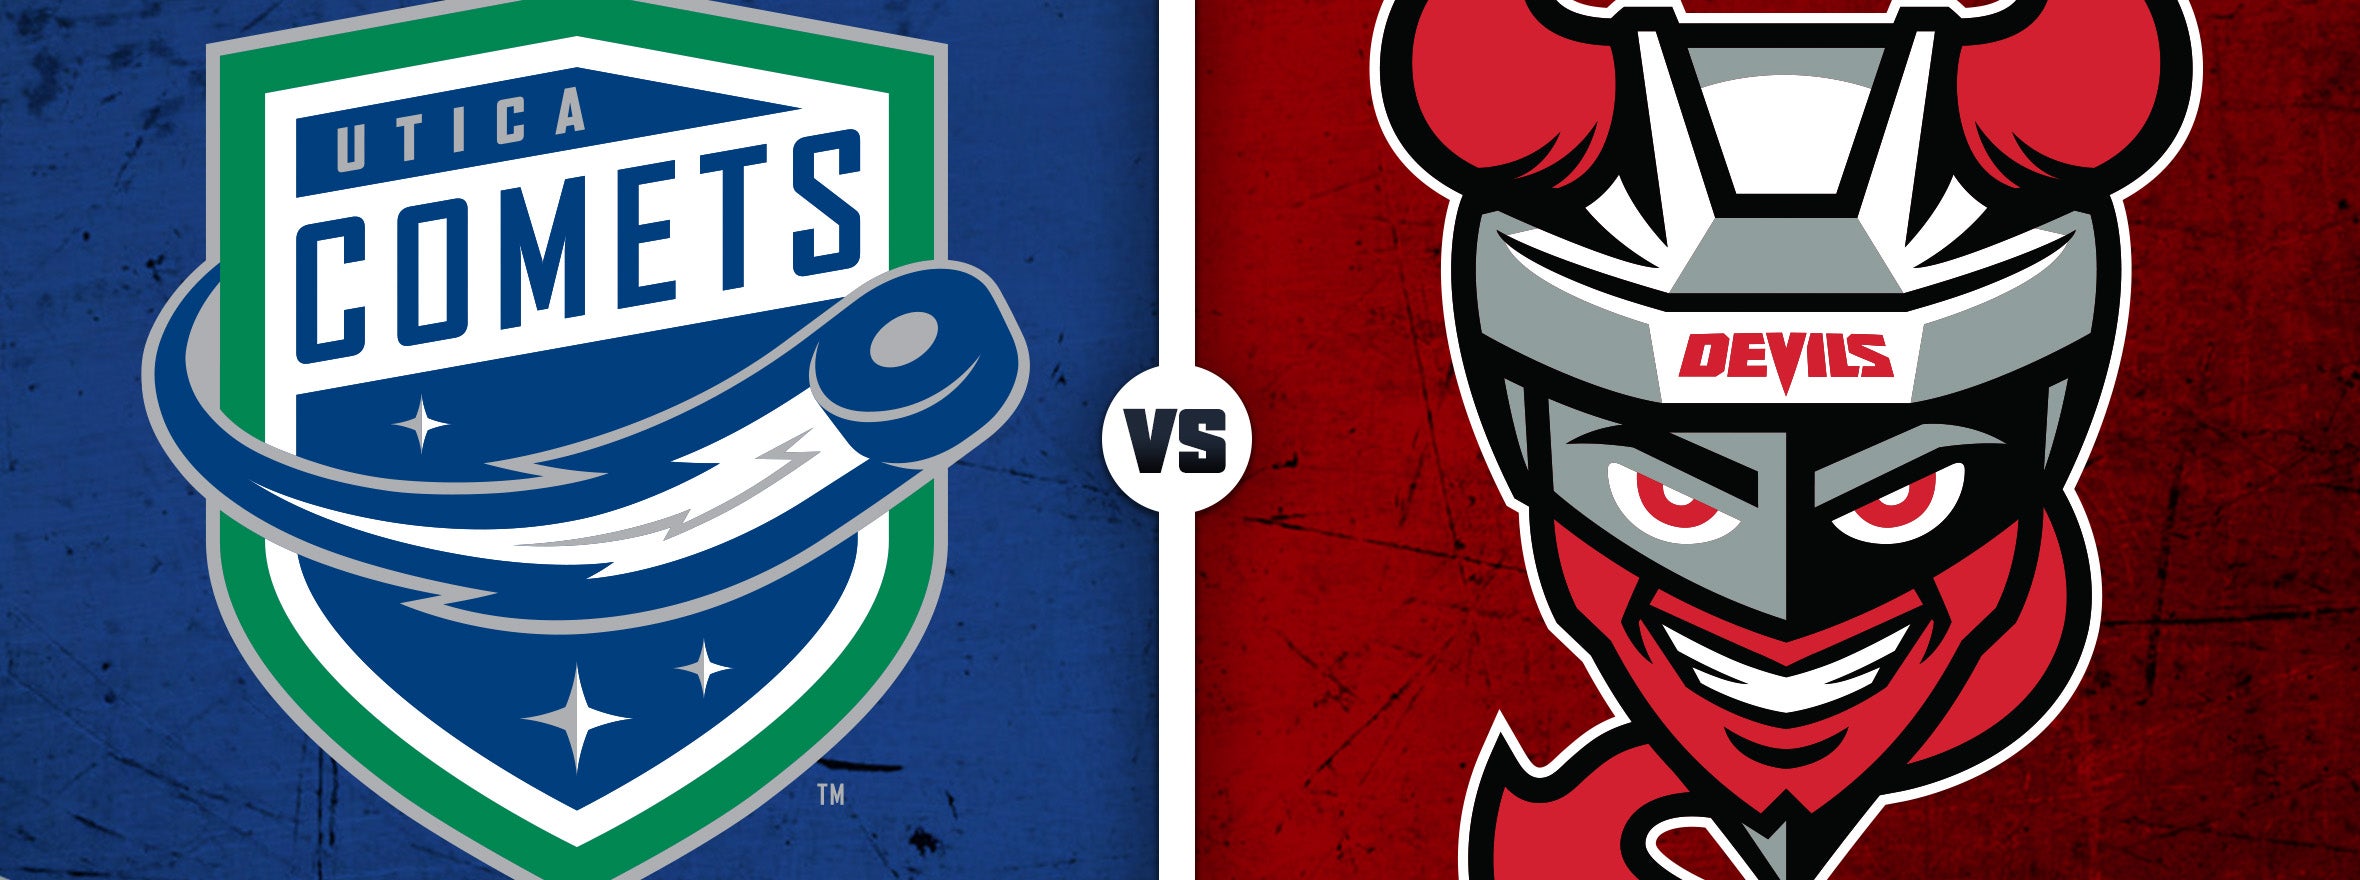 COMETS SET FOR SATURDAY MEETING WITH BINGHAMTON DEVILS